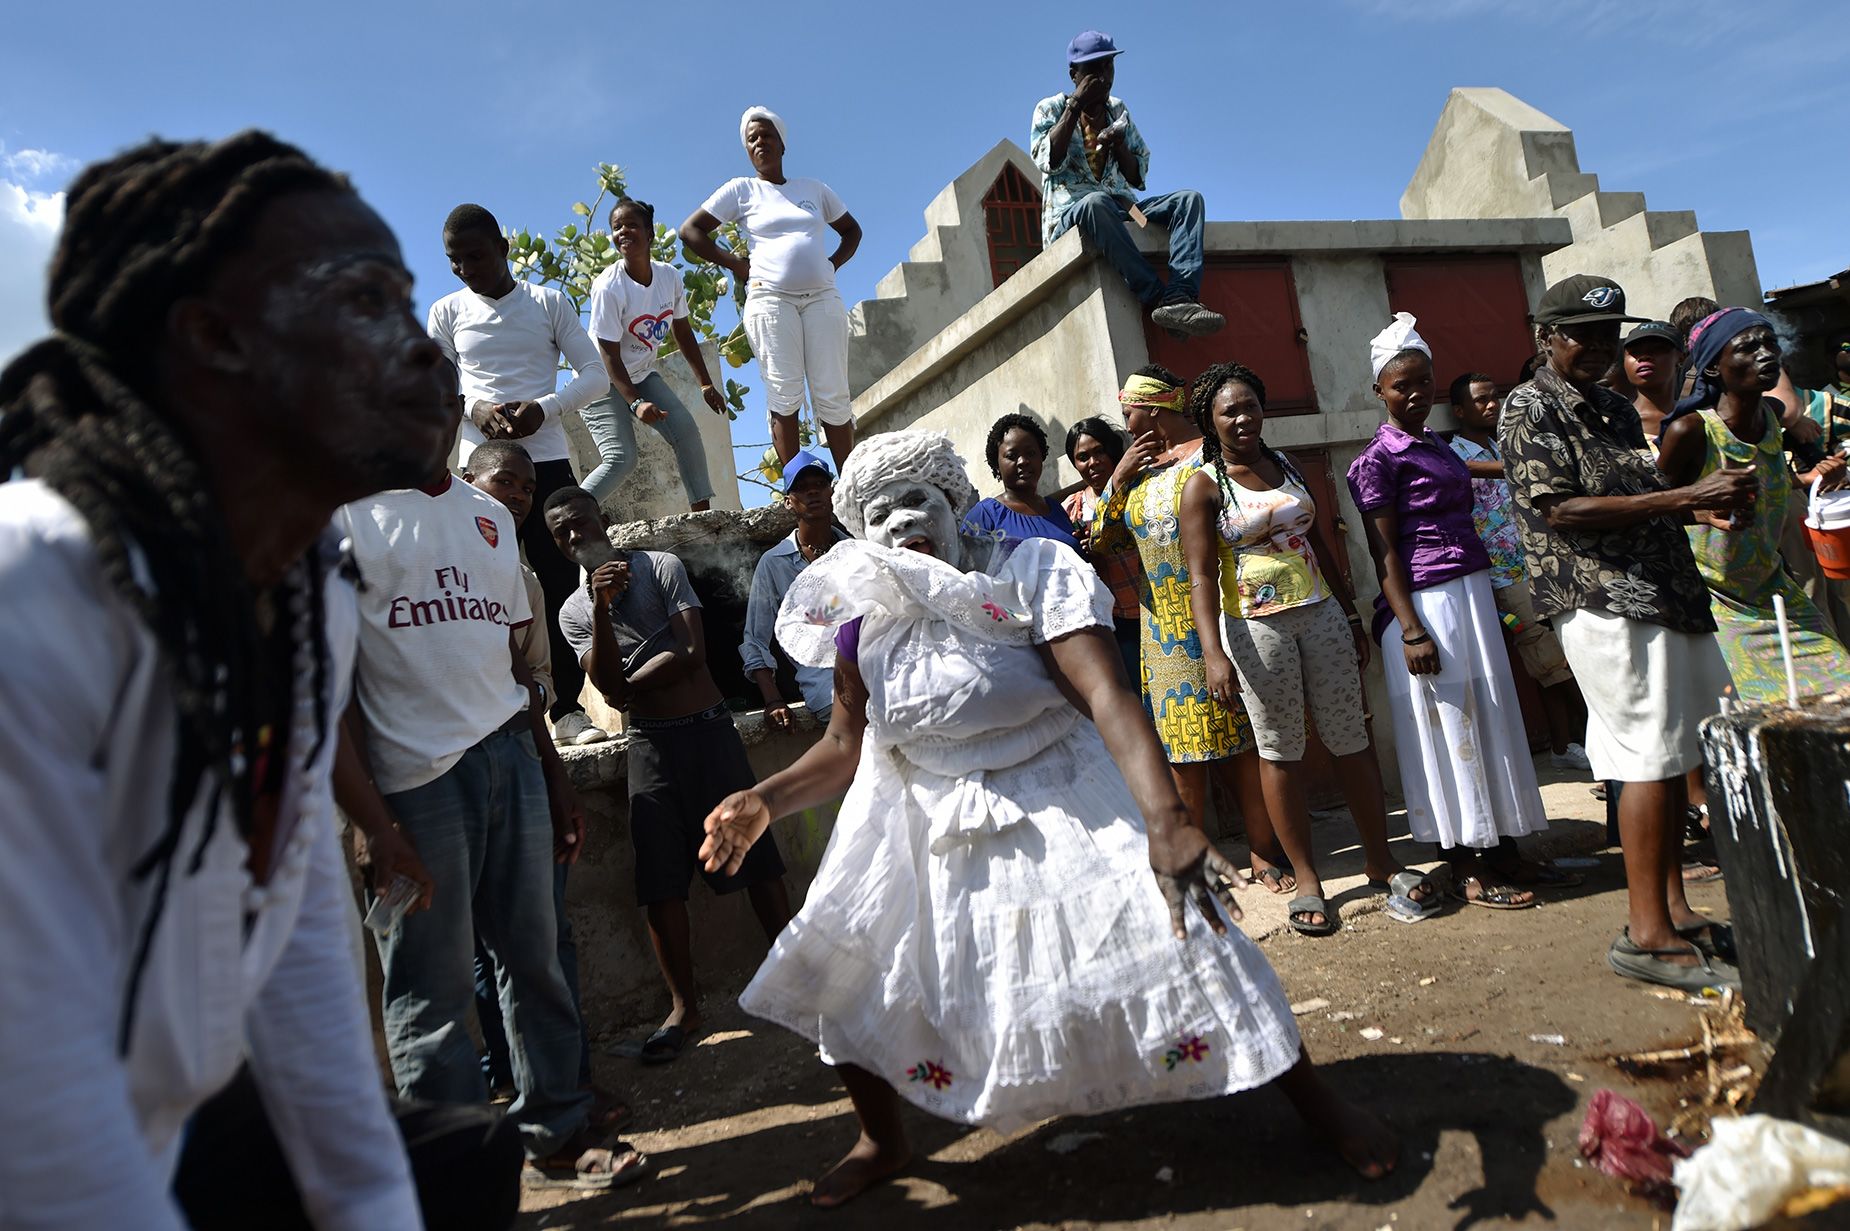 A woman devotee in the role of a spirit known as a Gede is seen during ceremonies honoring the Haitian voodoo spirit of Baron Samdi and Gede on the Day of the Dead in the Cementery of Cite Soleil, in Port-au-Prince, Haiti on November 1, 2017.